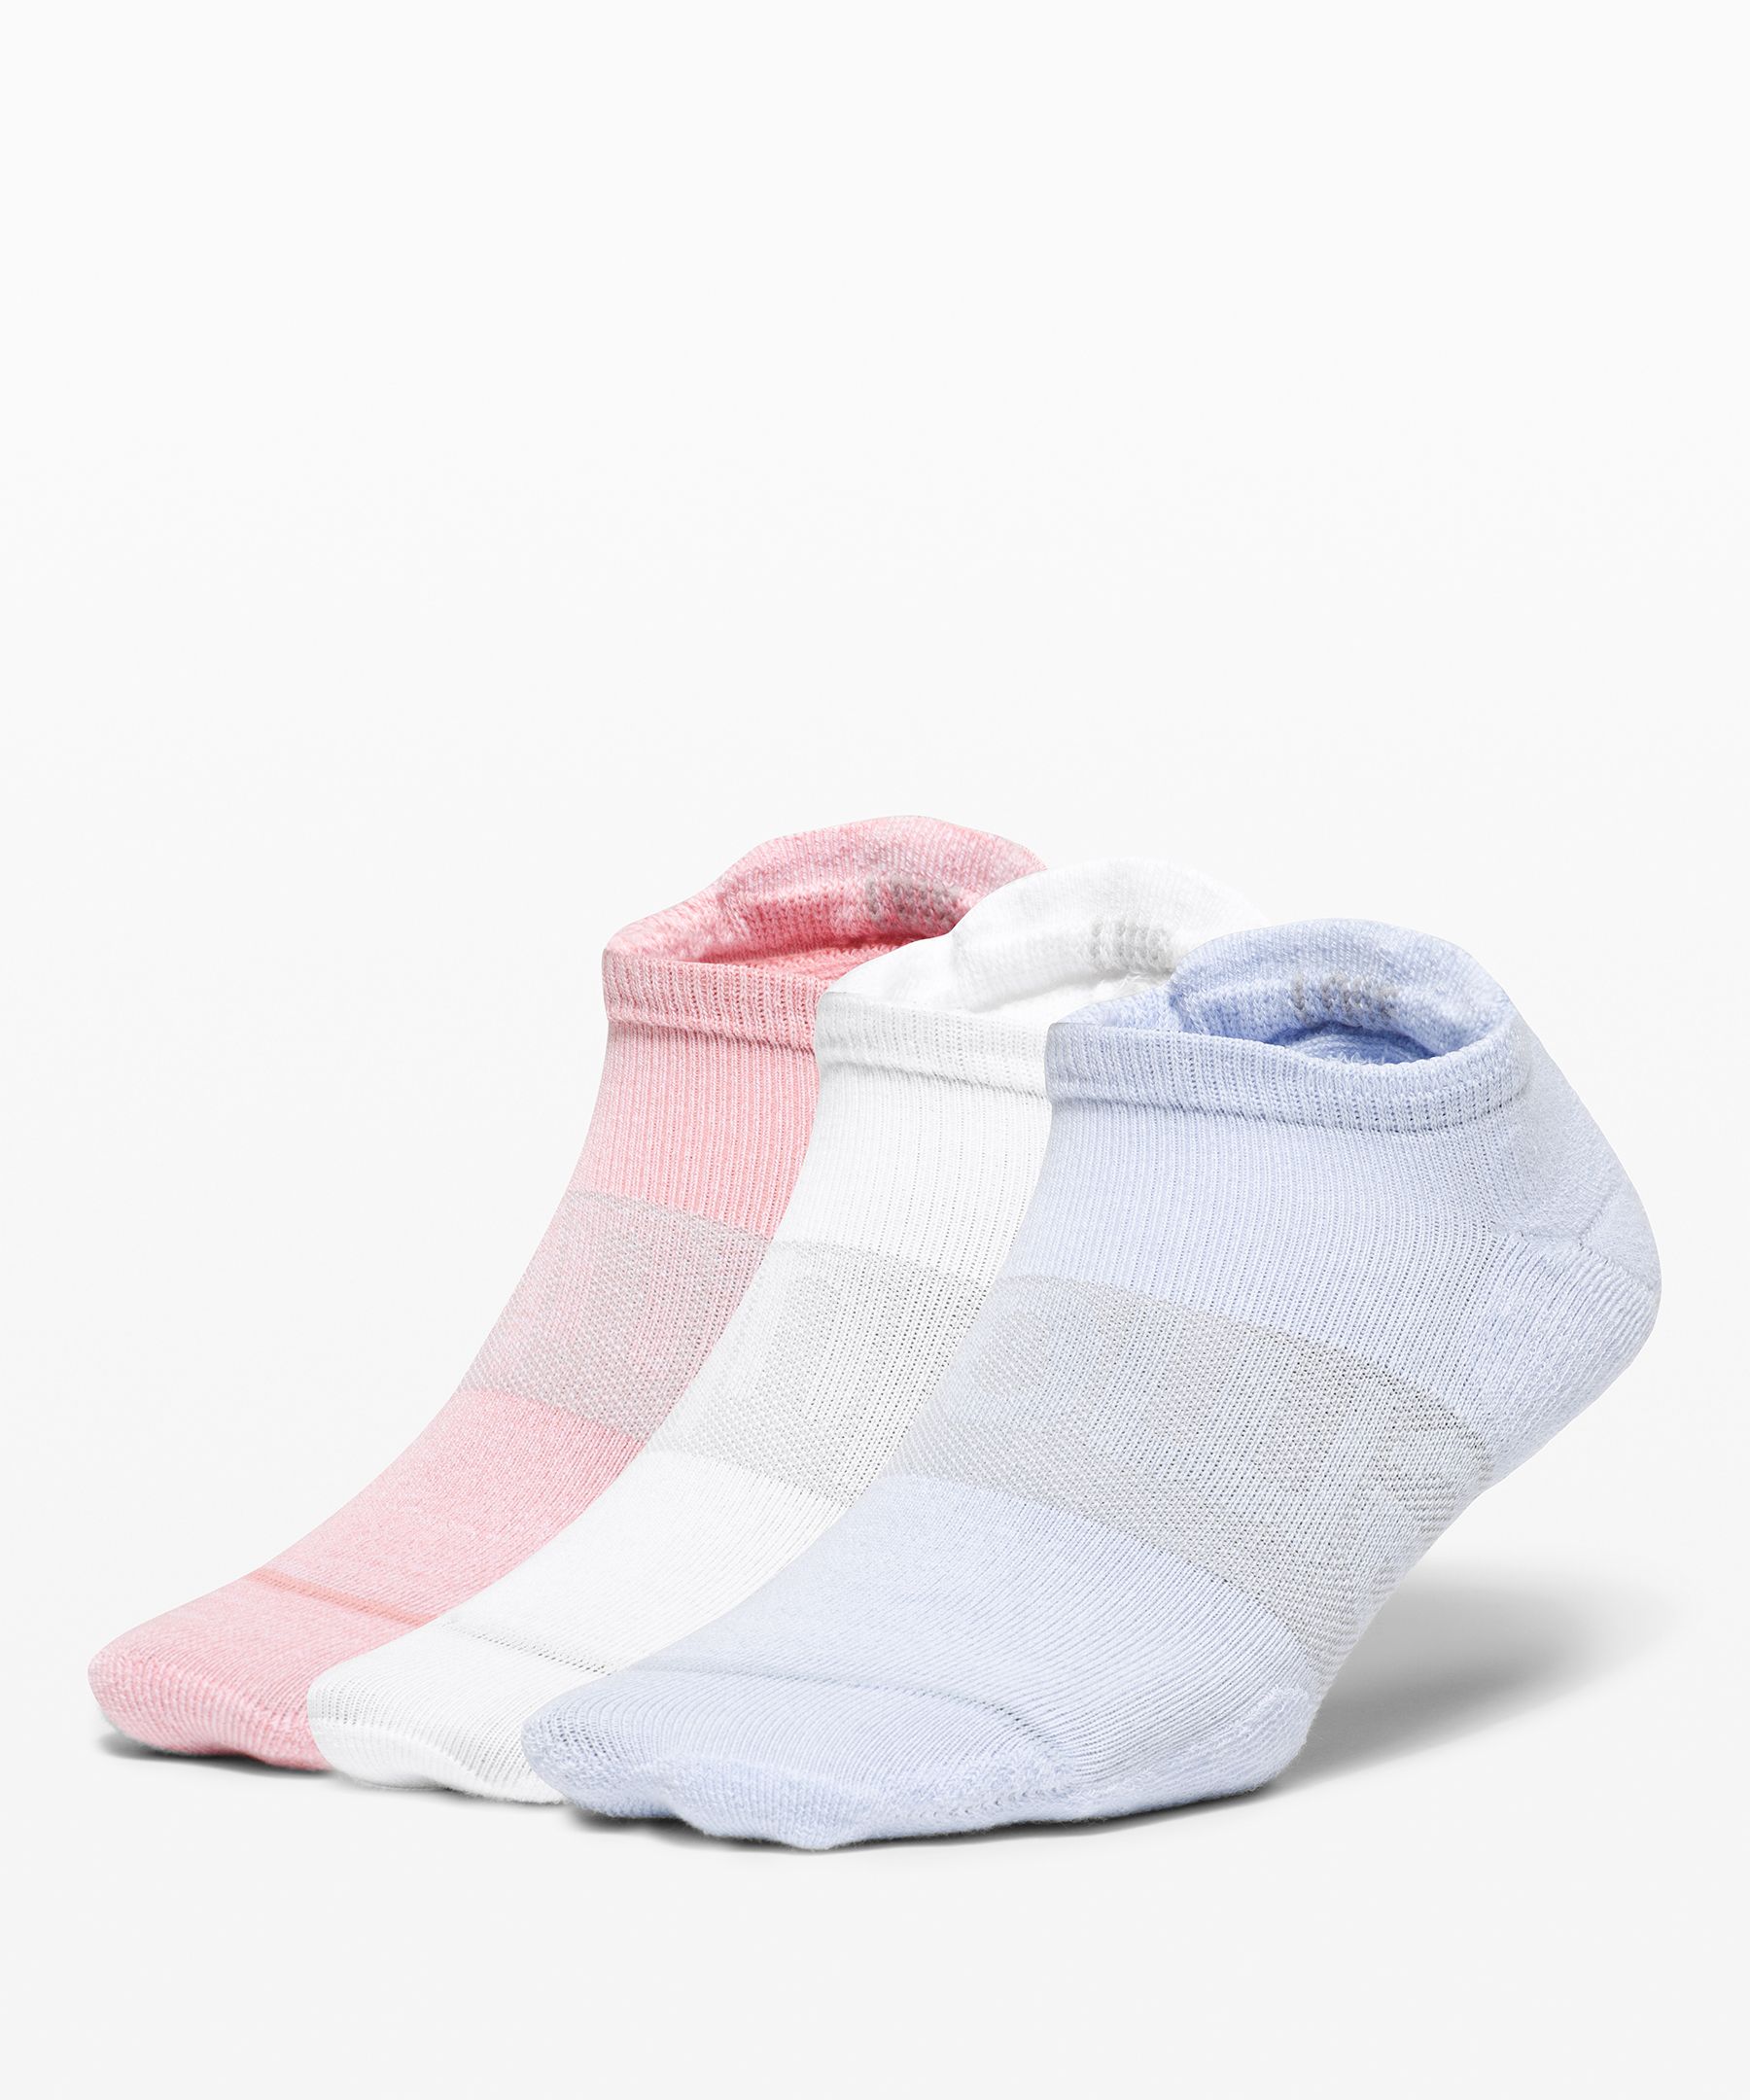 Lululemon Daily Stride Low Ankle Socks 3 Pack In White/pink Puff/blue Linen